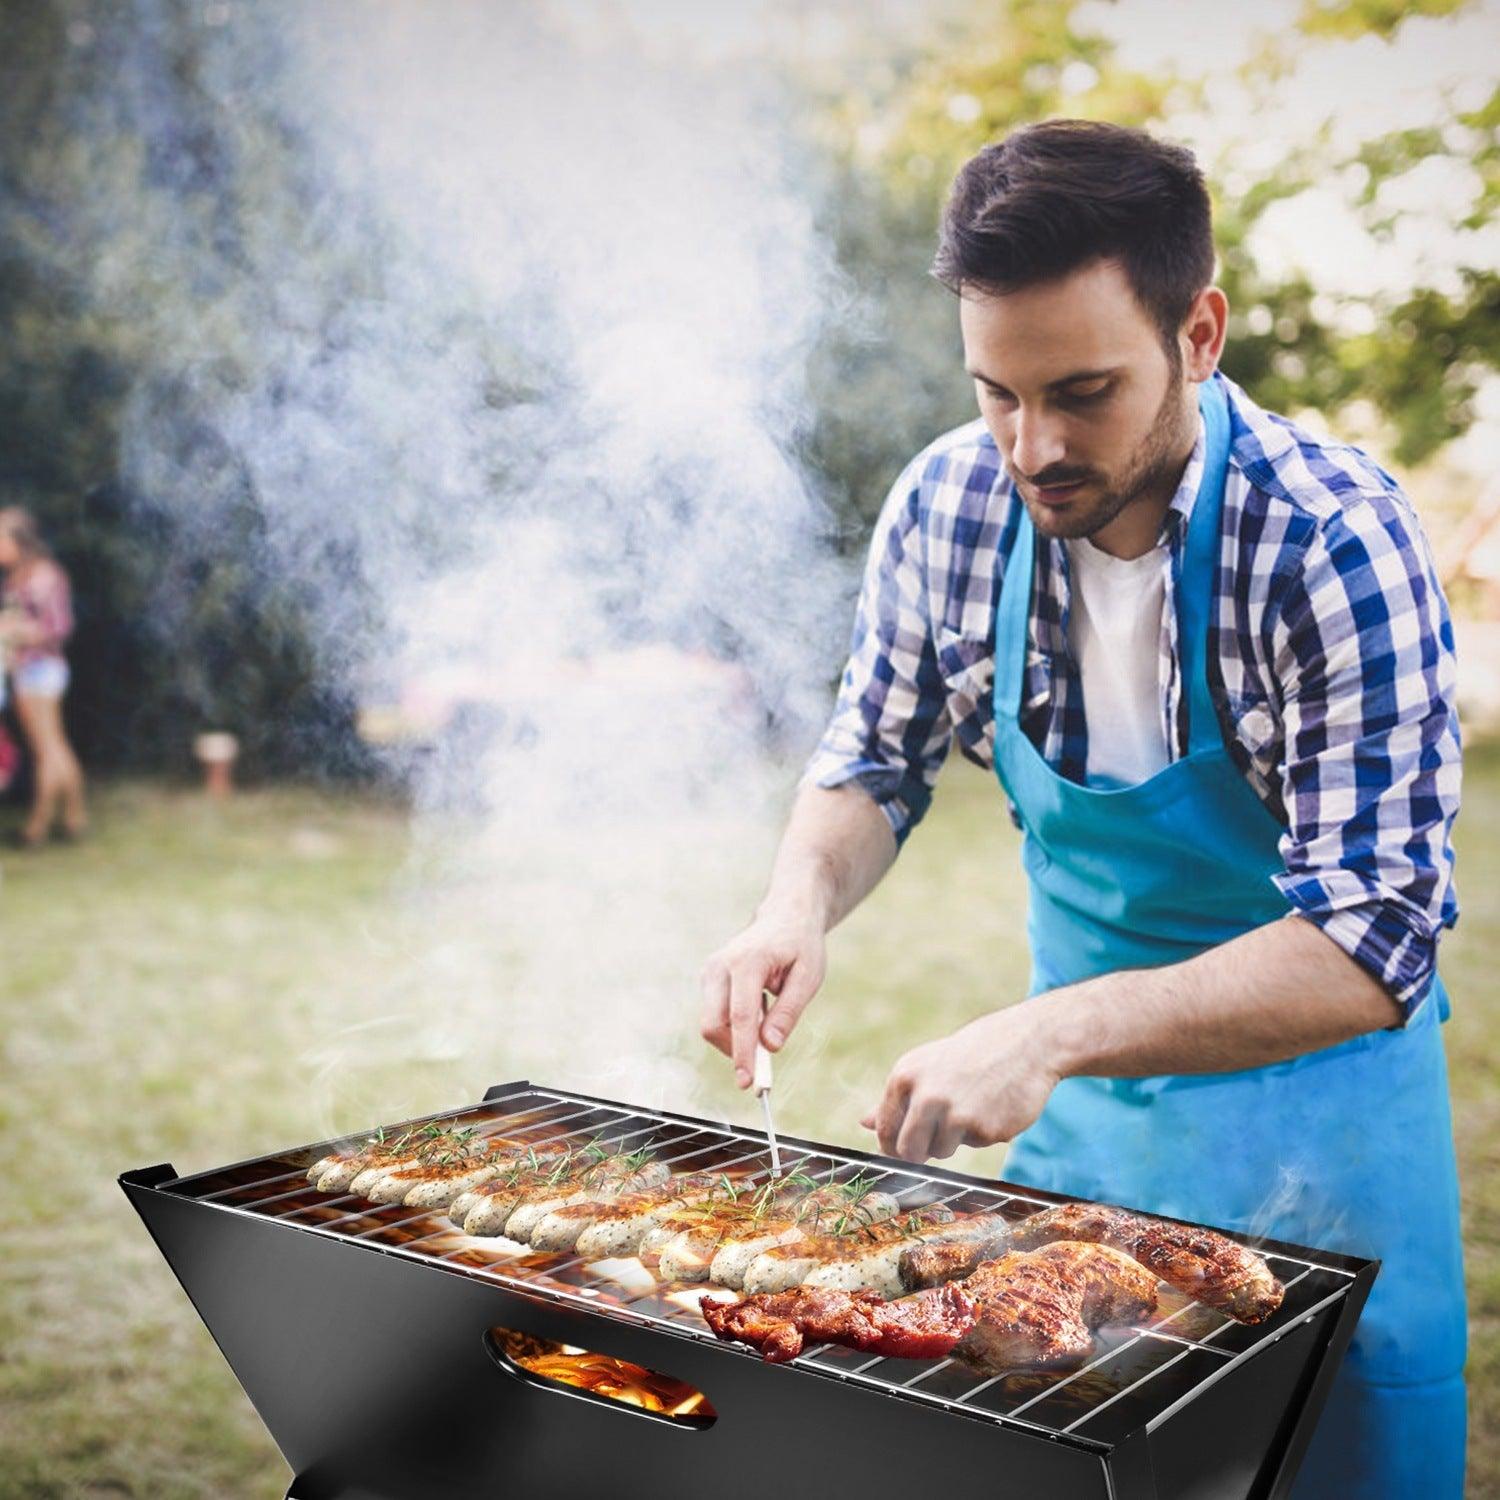 LazyPro B2 Portable BBQ Barbecue Grill Foldable Charcoal Grill Camping Garden Outdoor Travel - Lazy Pro